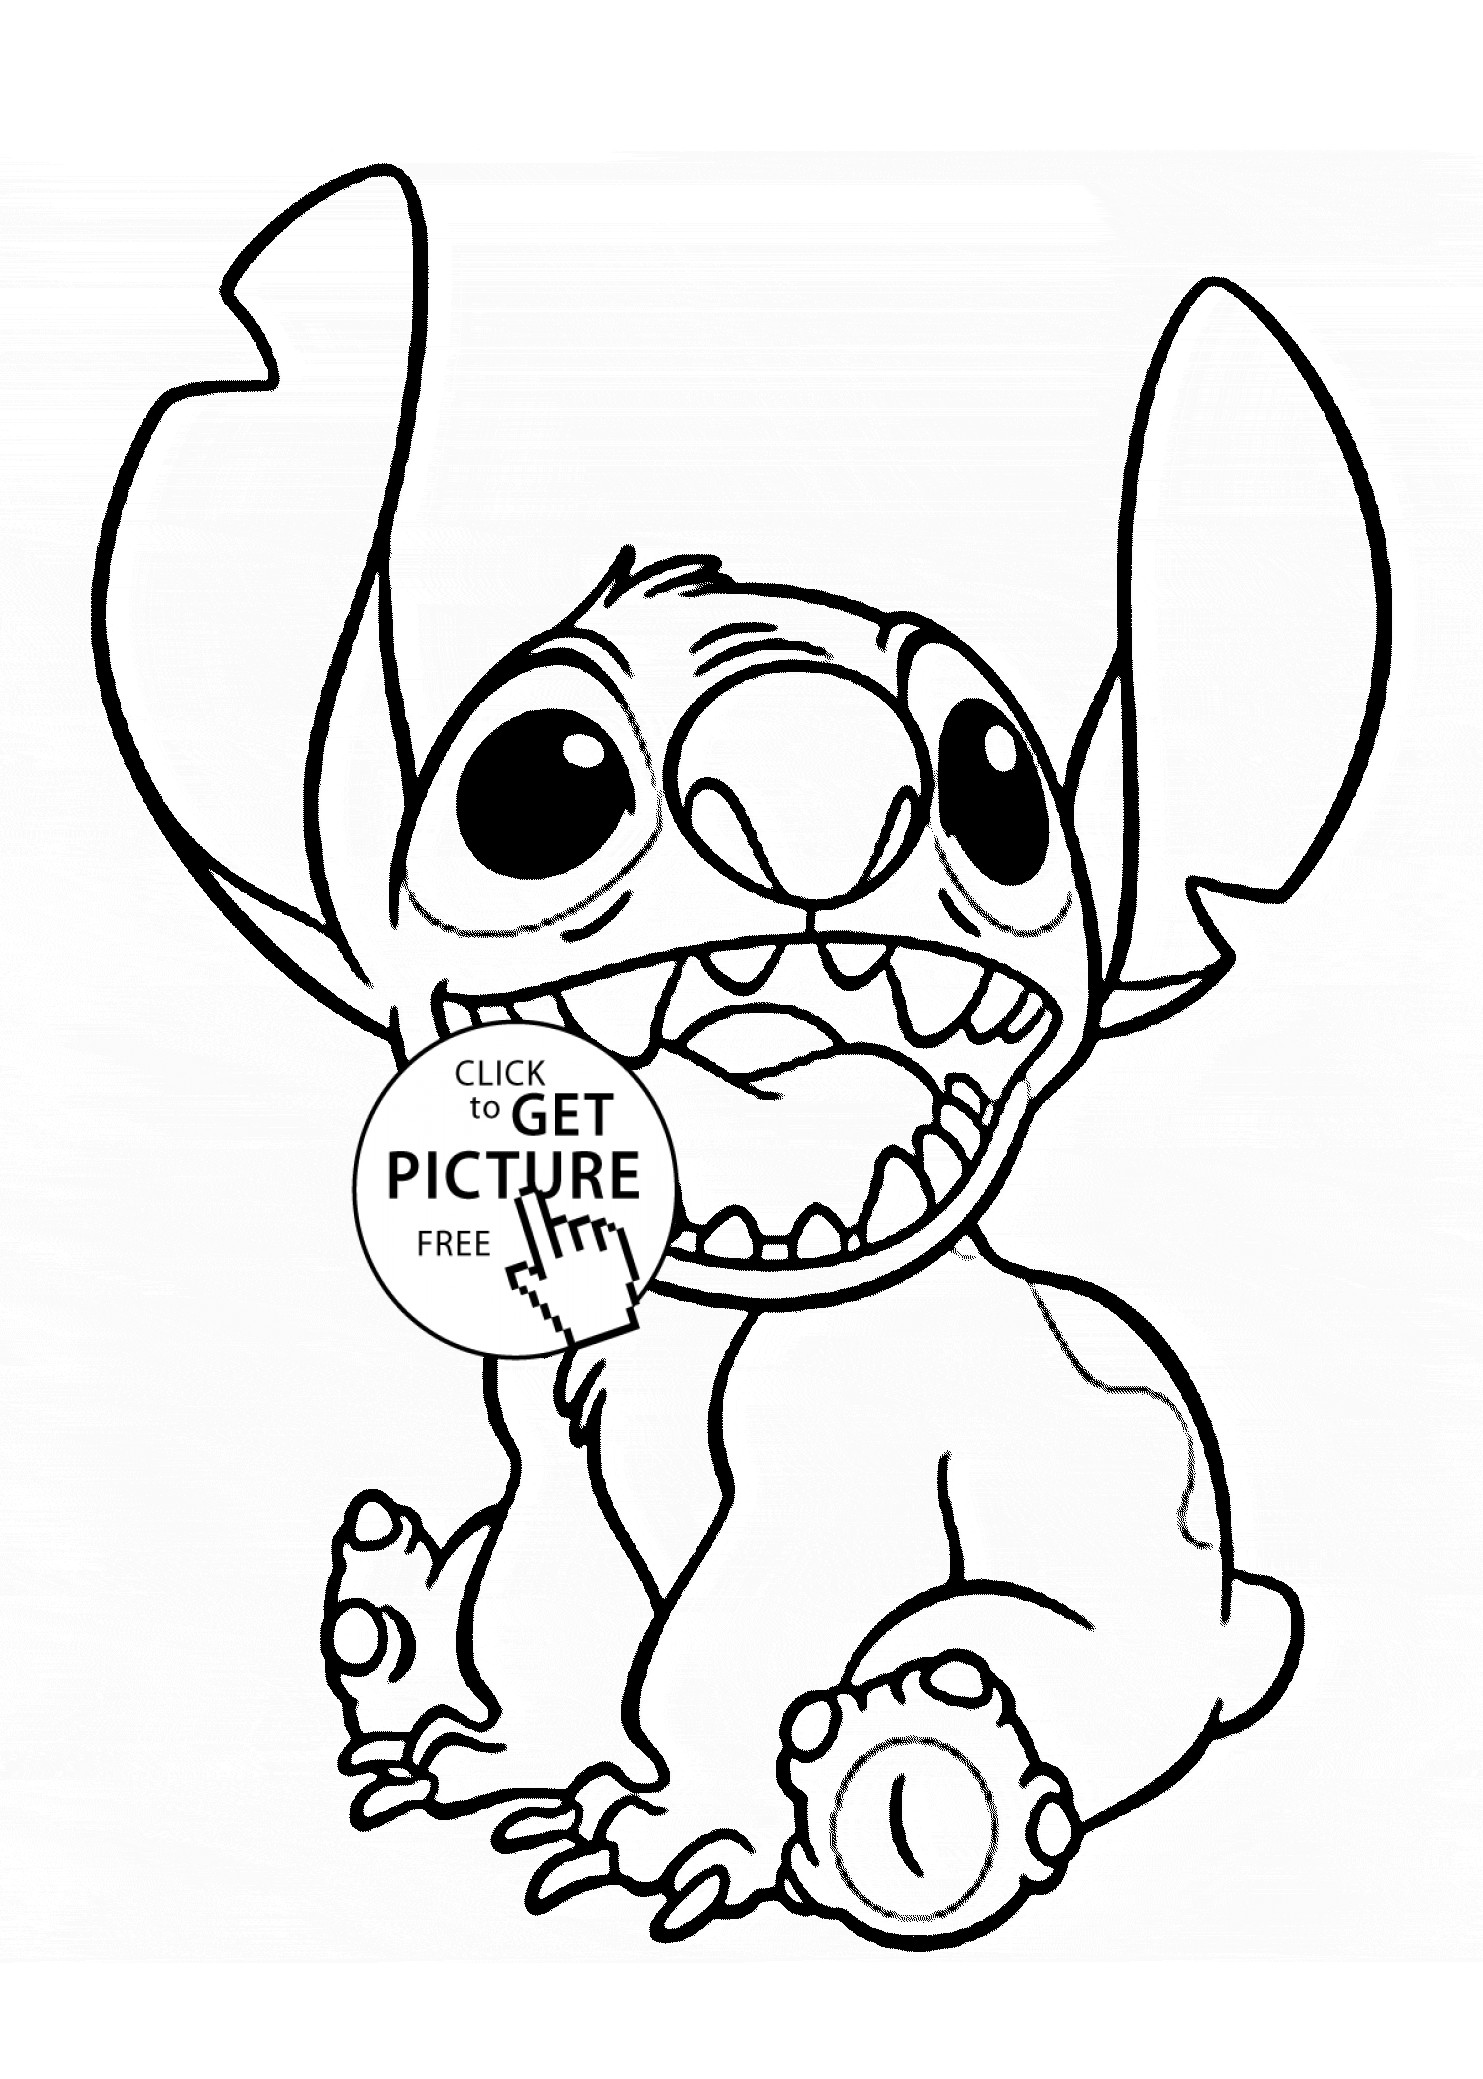 Stitch Coloring Pages To Print
 Stitch coloring pages for kids printable free